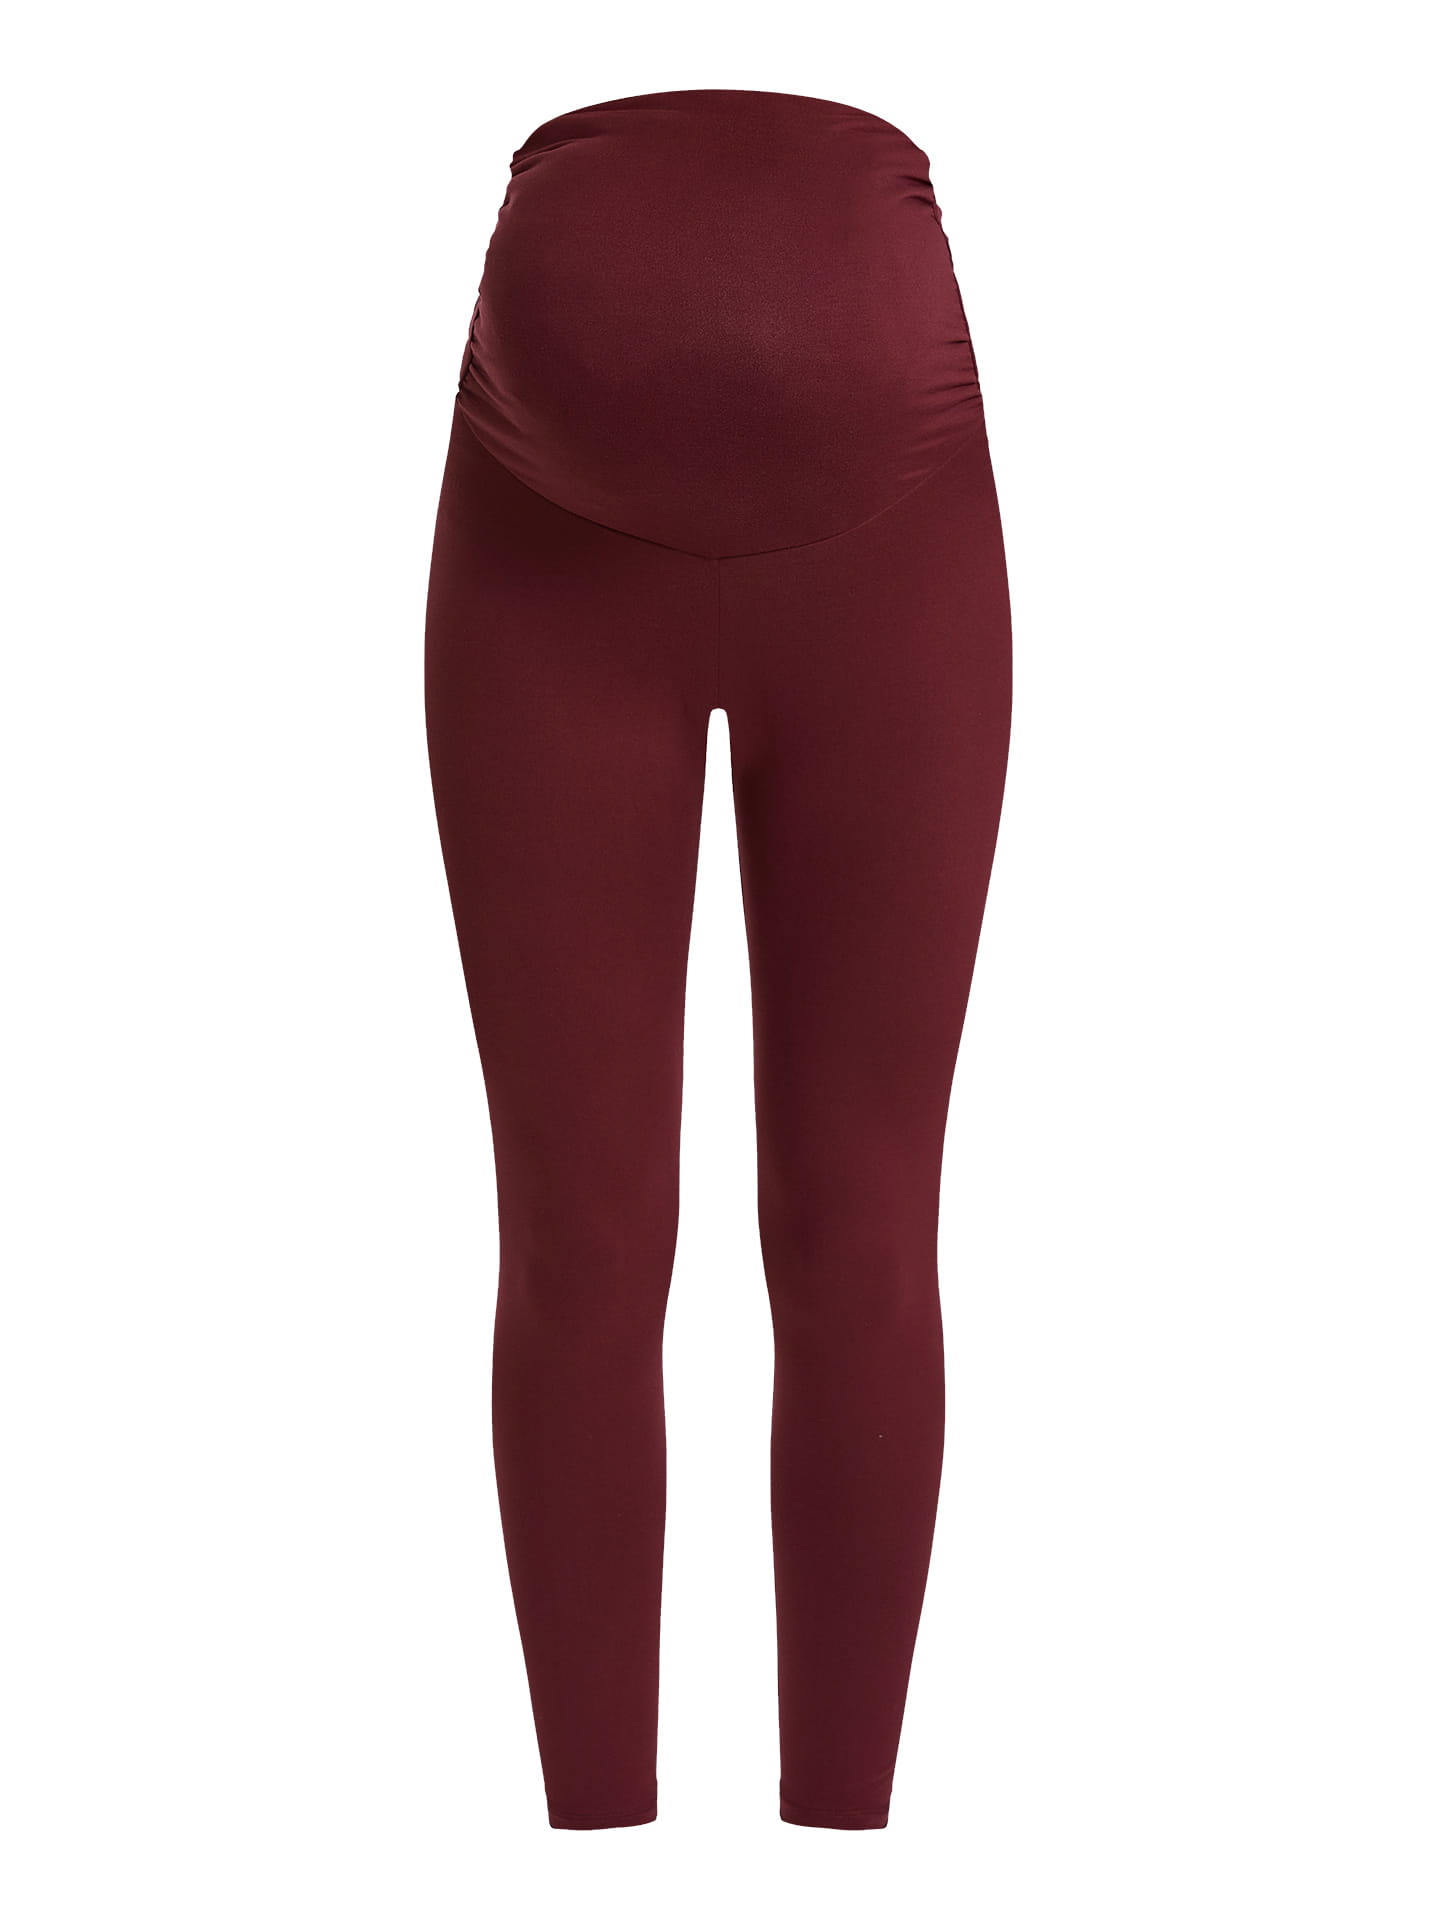 Pact, Pants & Jumpsuits, Pact Organic Cotton Red Burgundy Leggings With  Pockets Size Xl